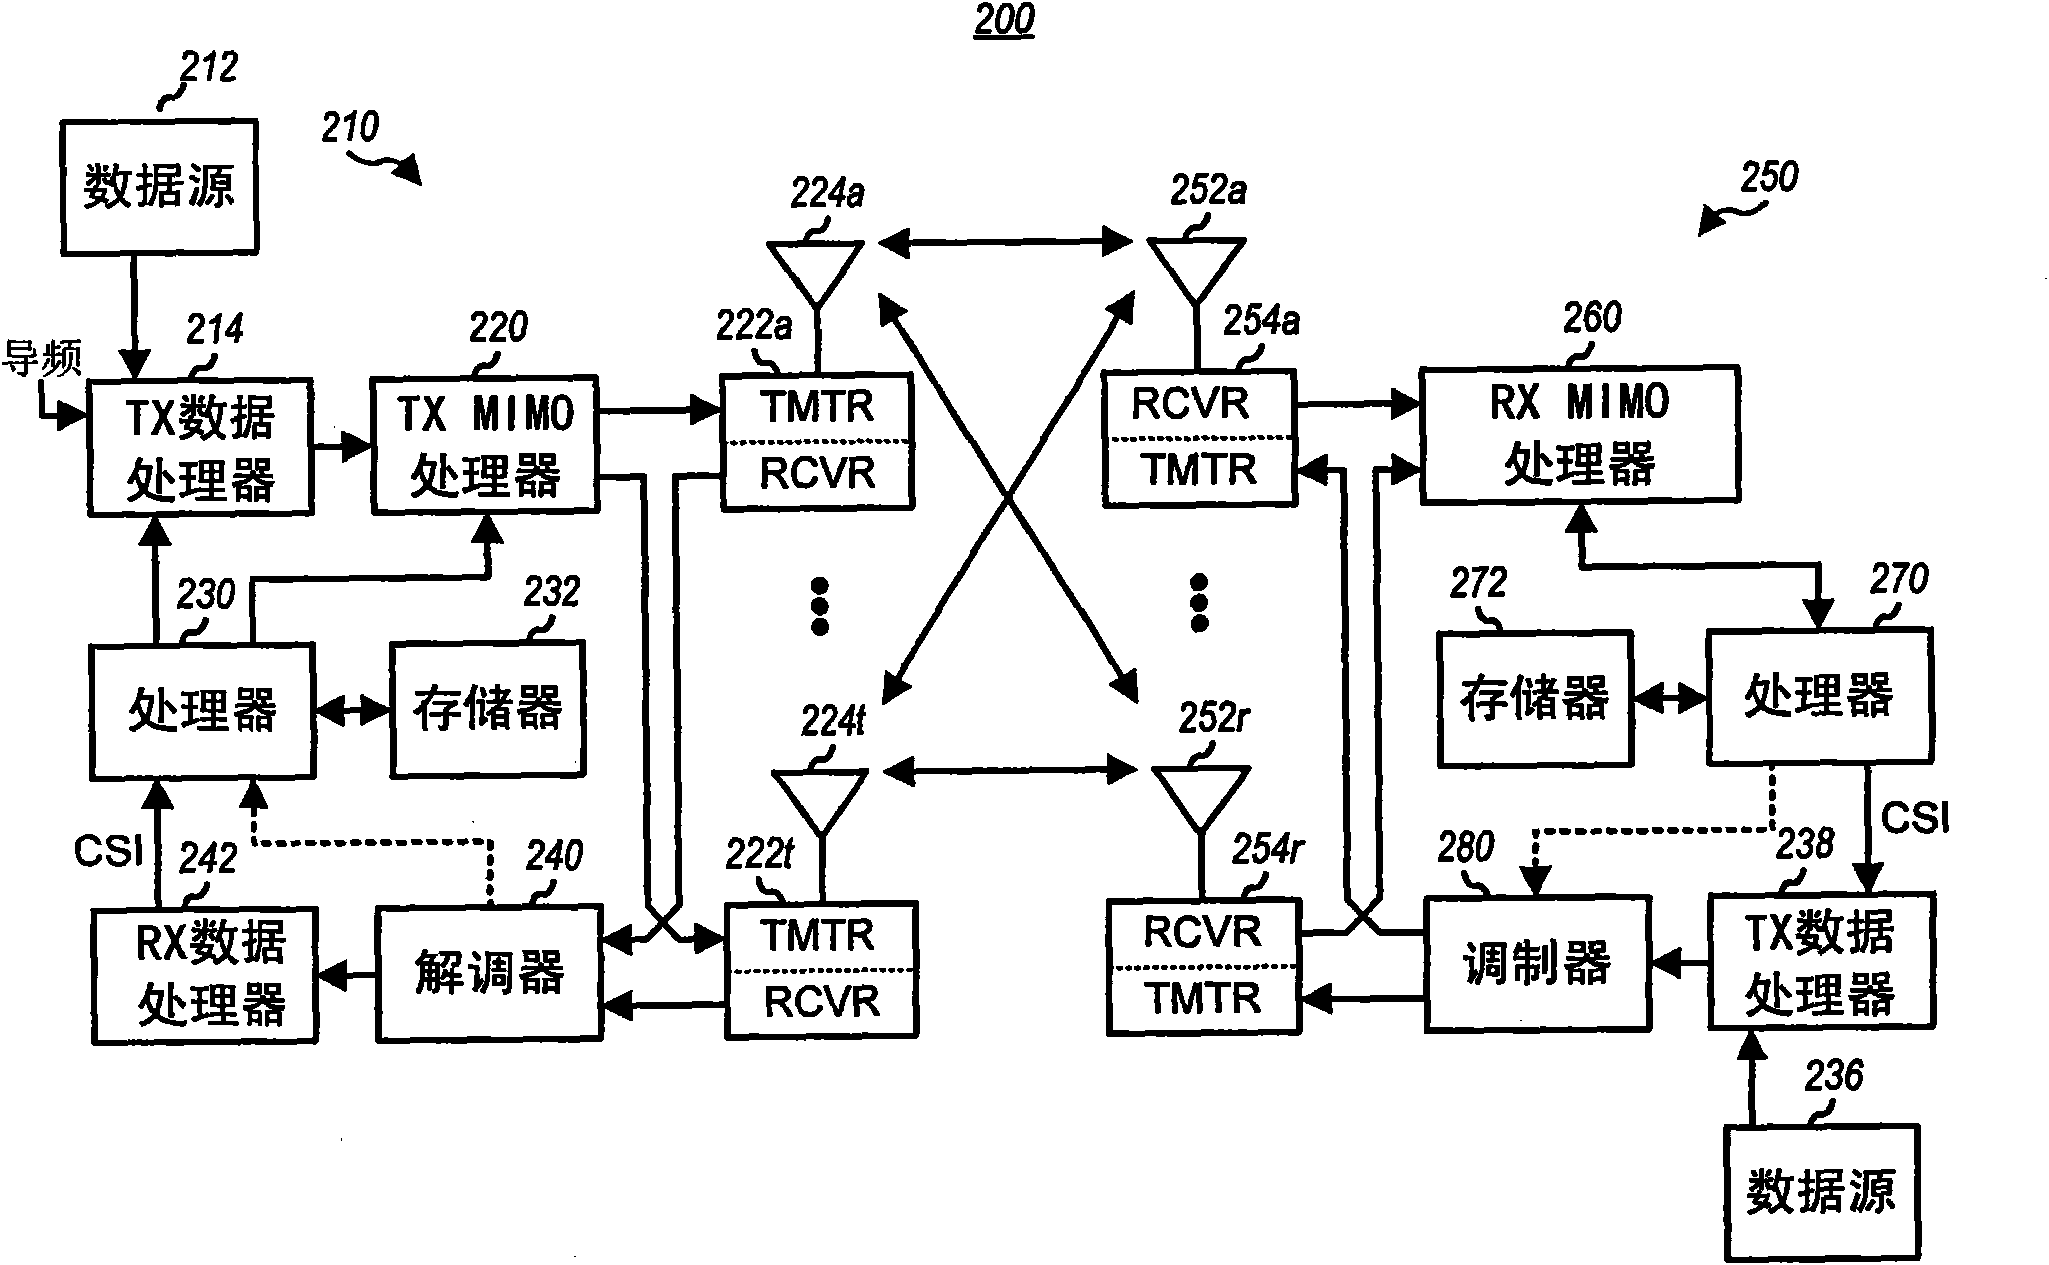 Method and apparatus for generating a cryptosync